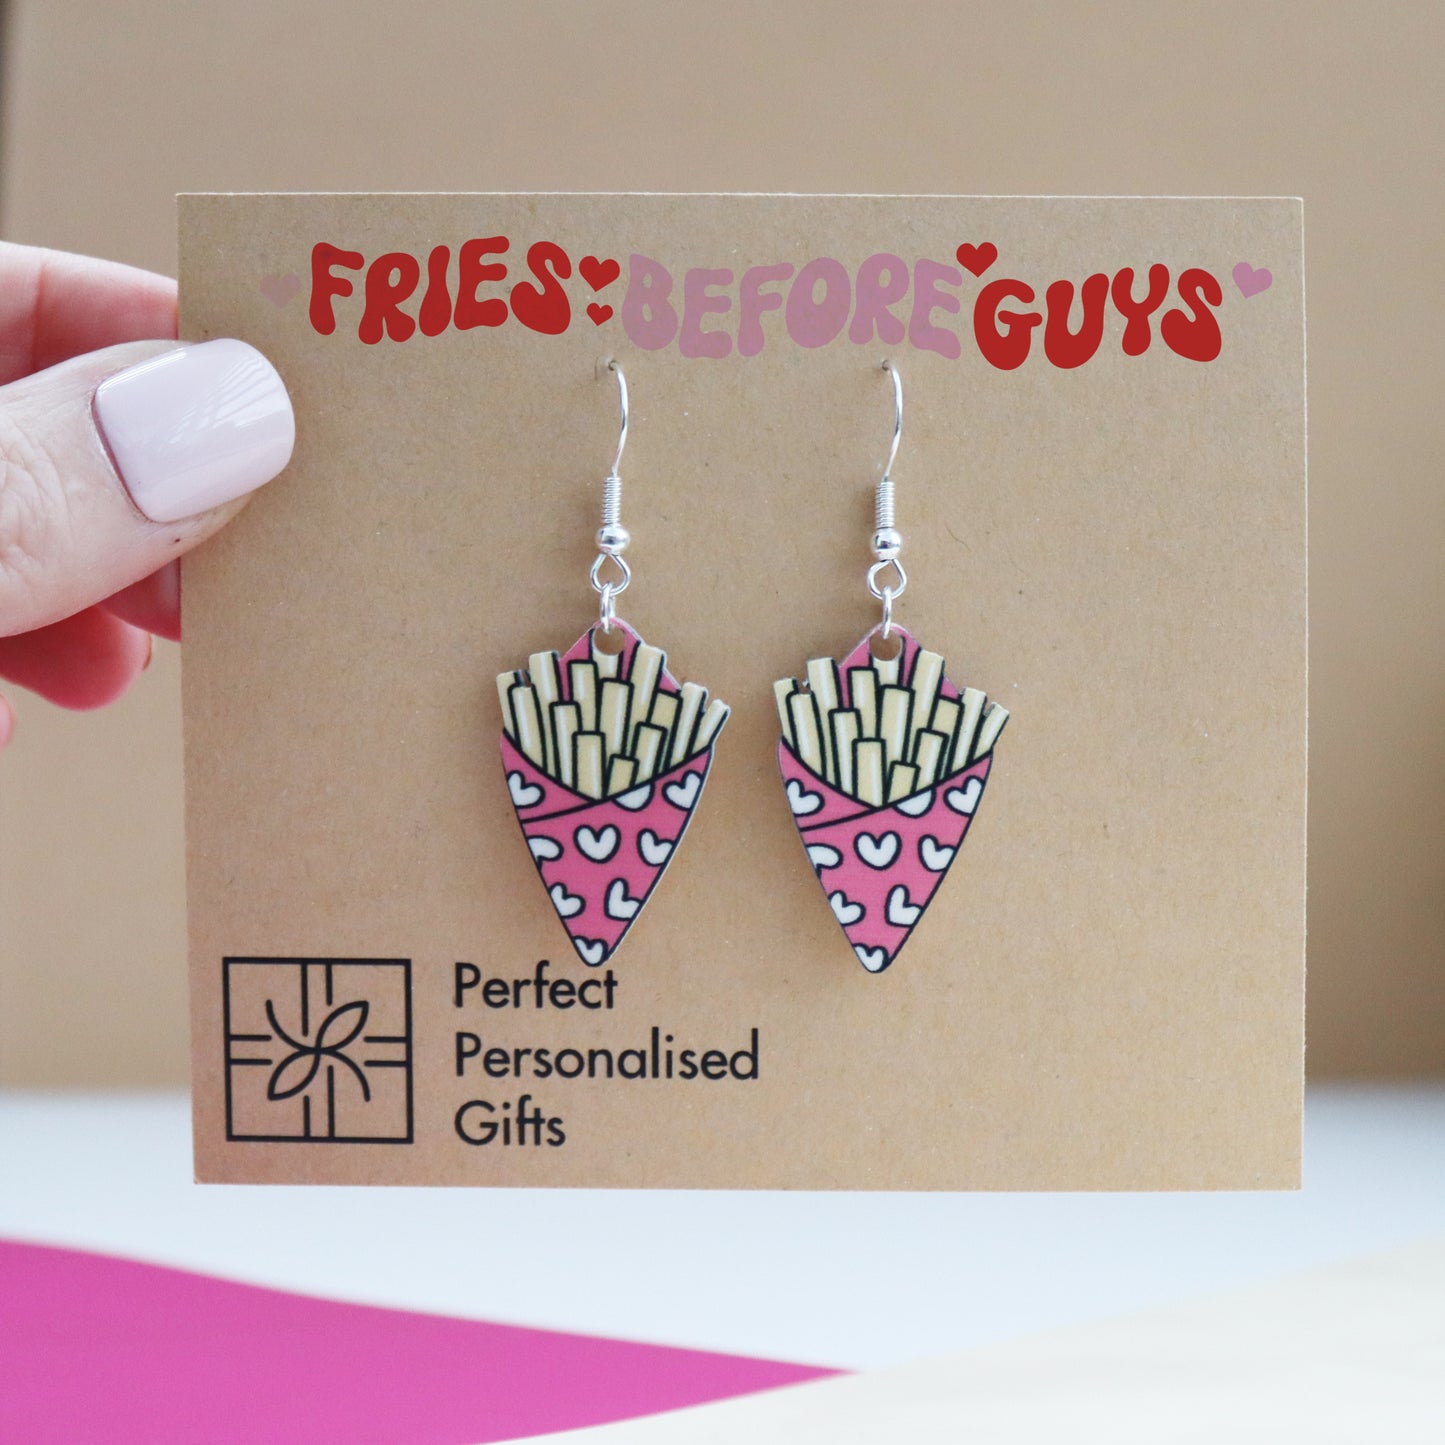 fries before guys earrings cut from acrylic and printed with a bag of chips the card is being held by a hand to show size reference